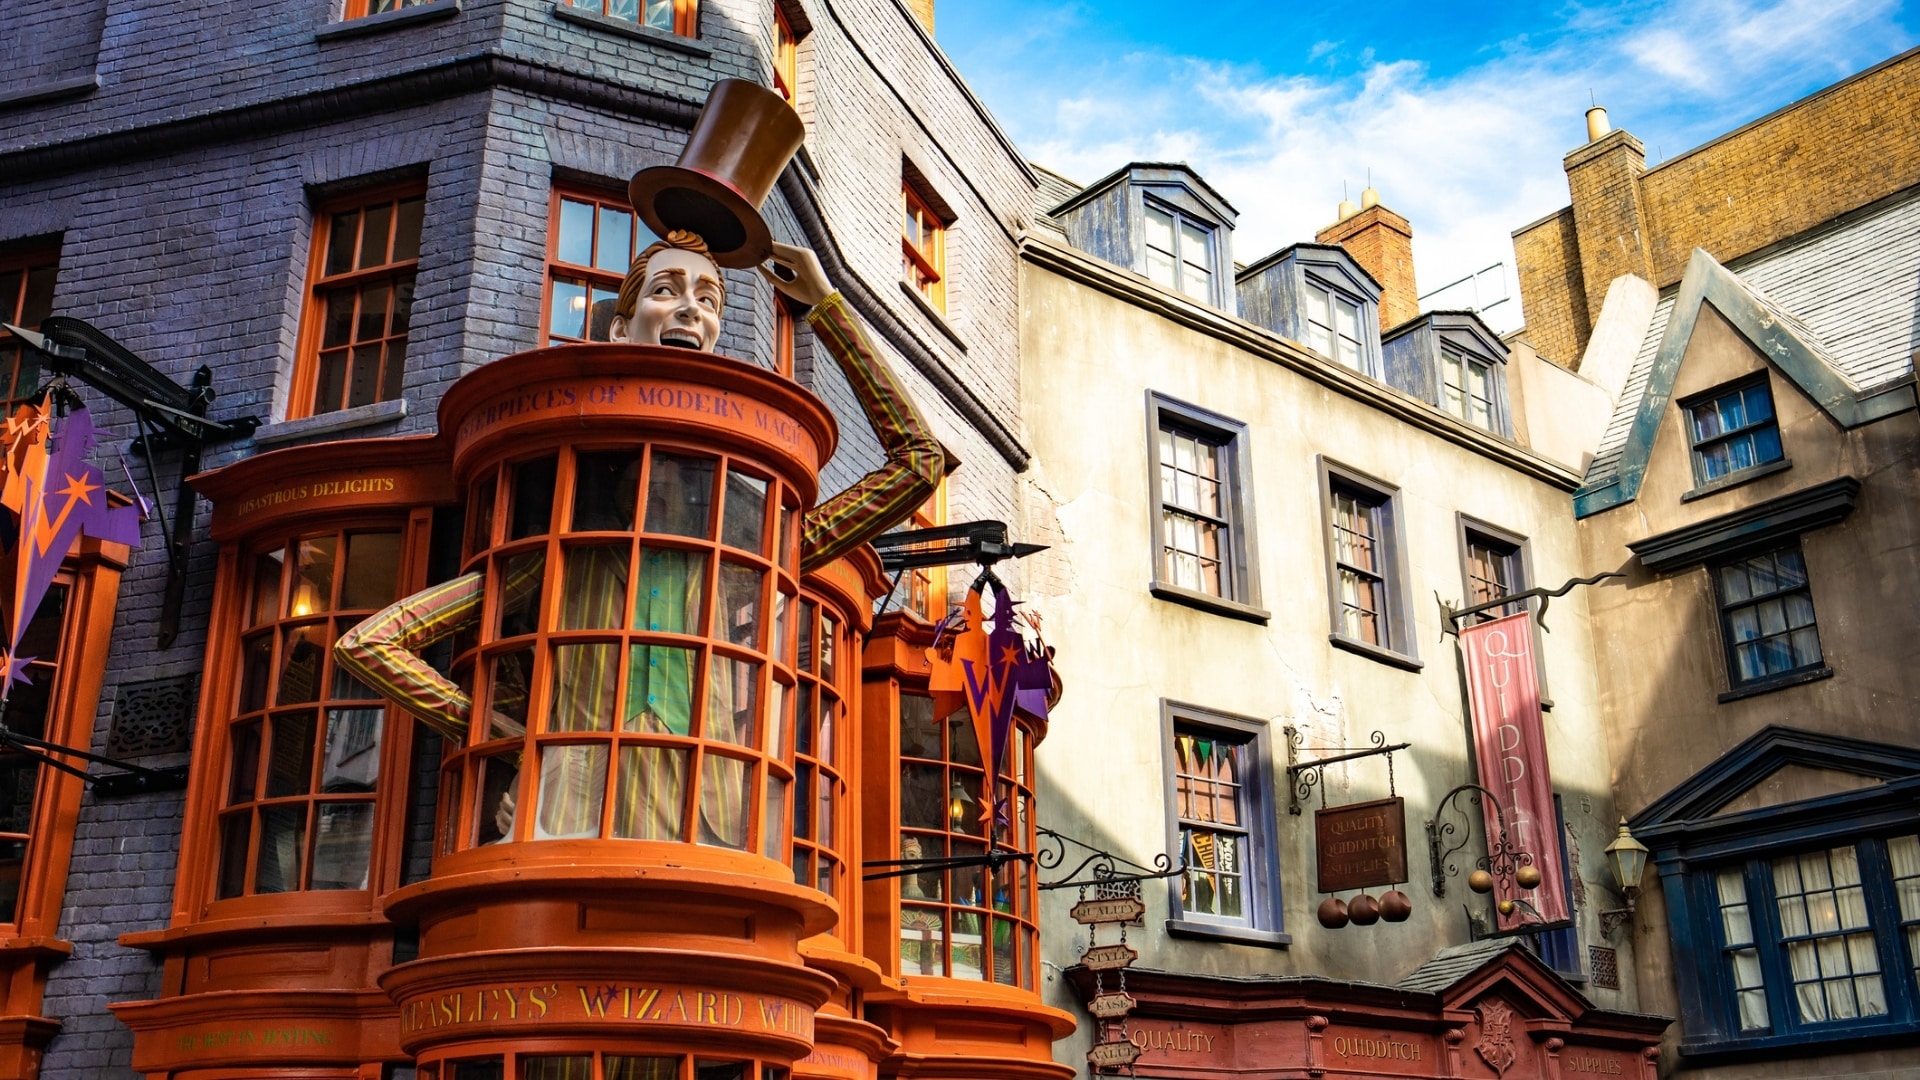 Wizarding World of Harry Potter – Diagon Alley